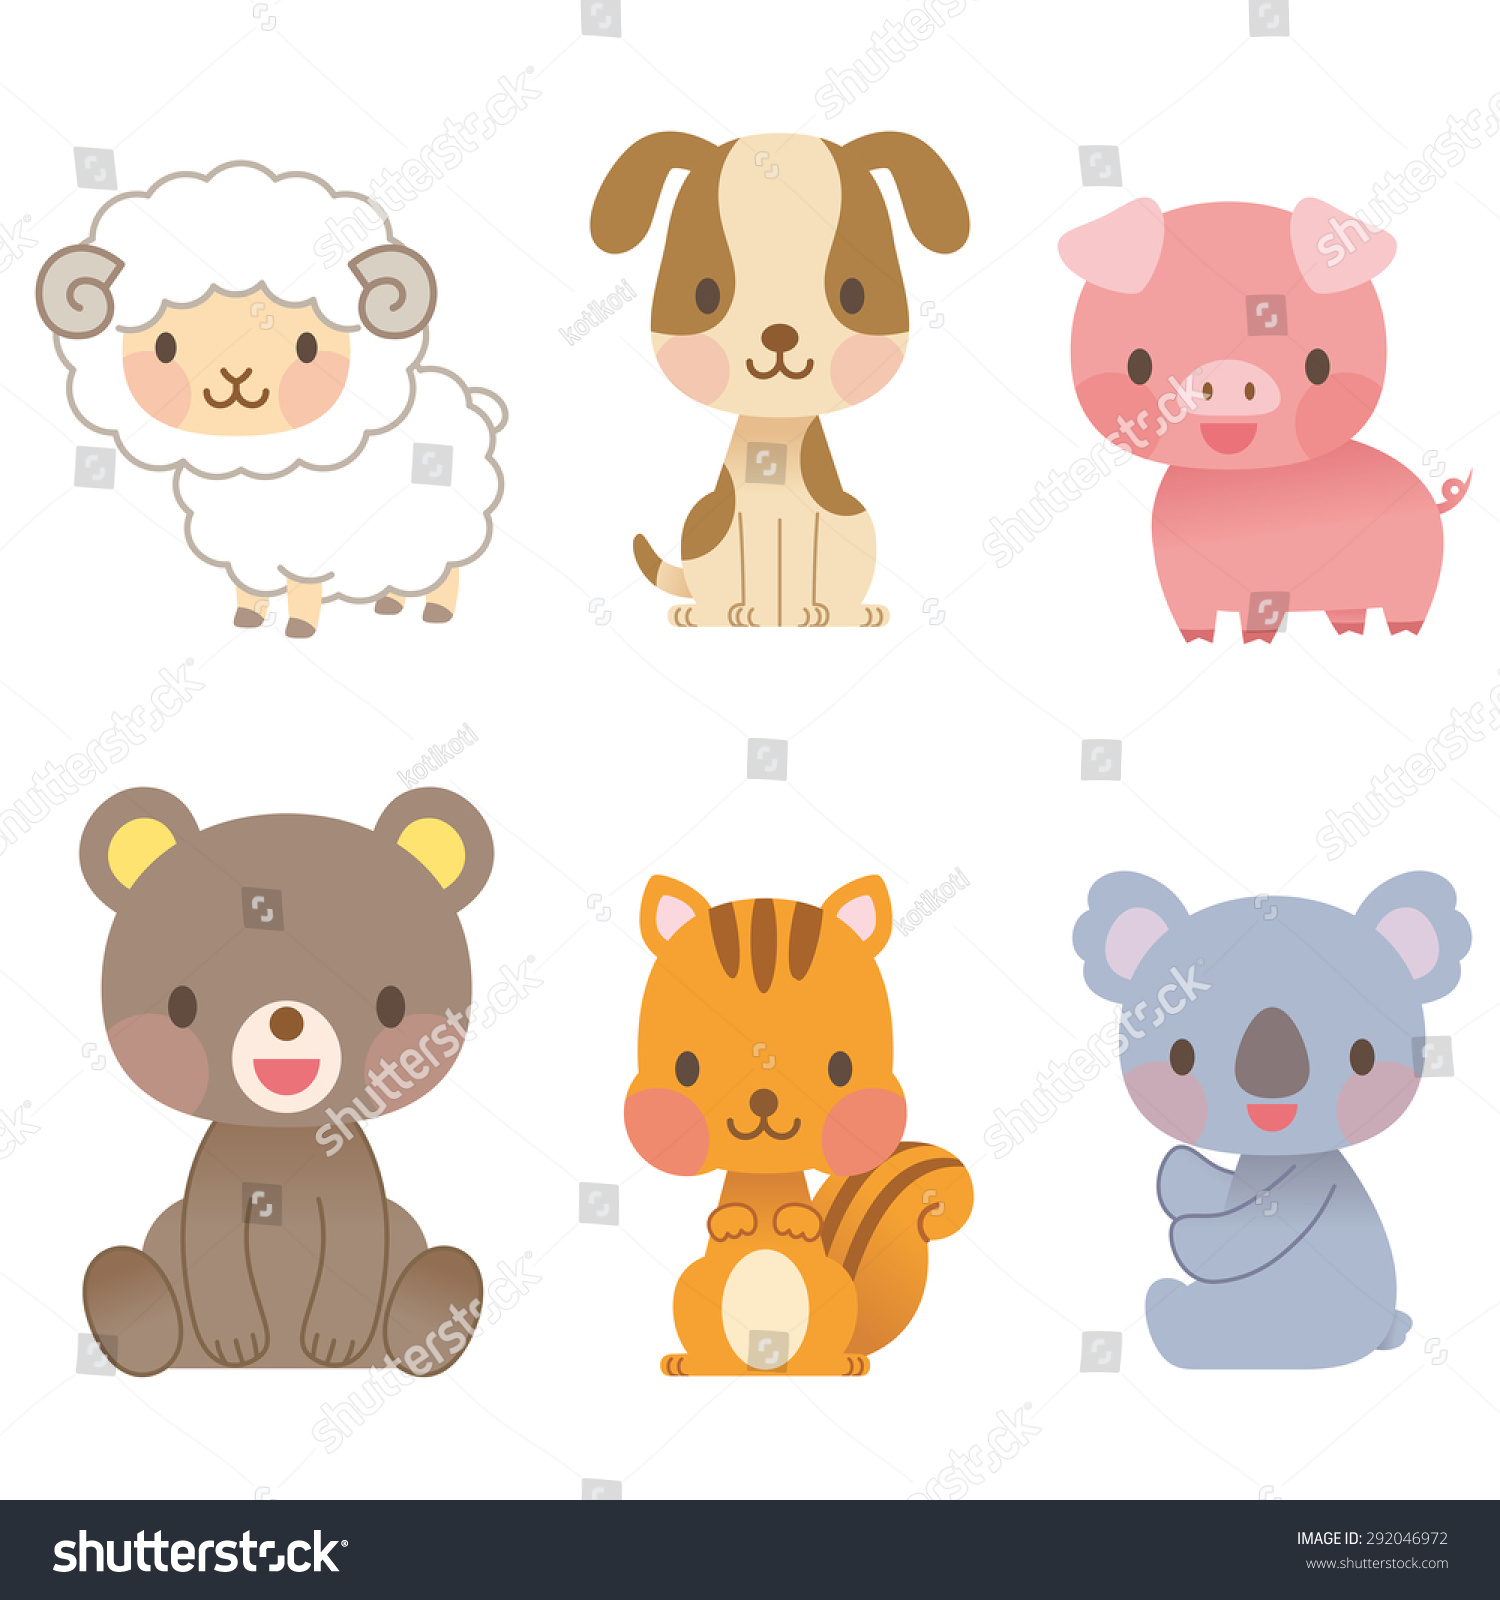 animal clipart collection - photo #32